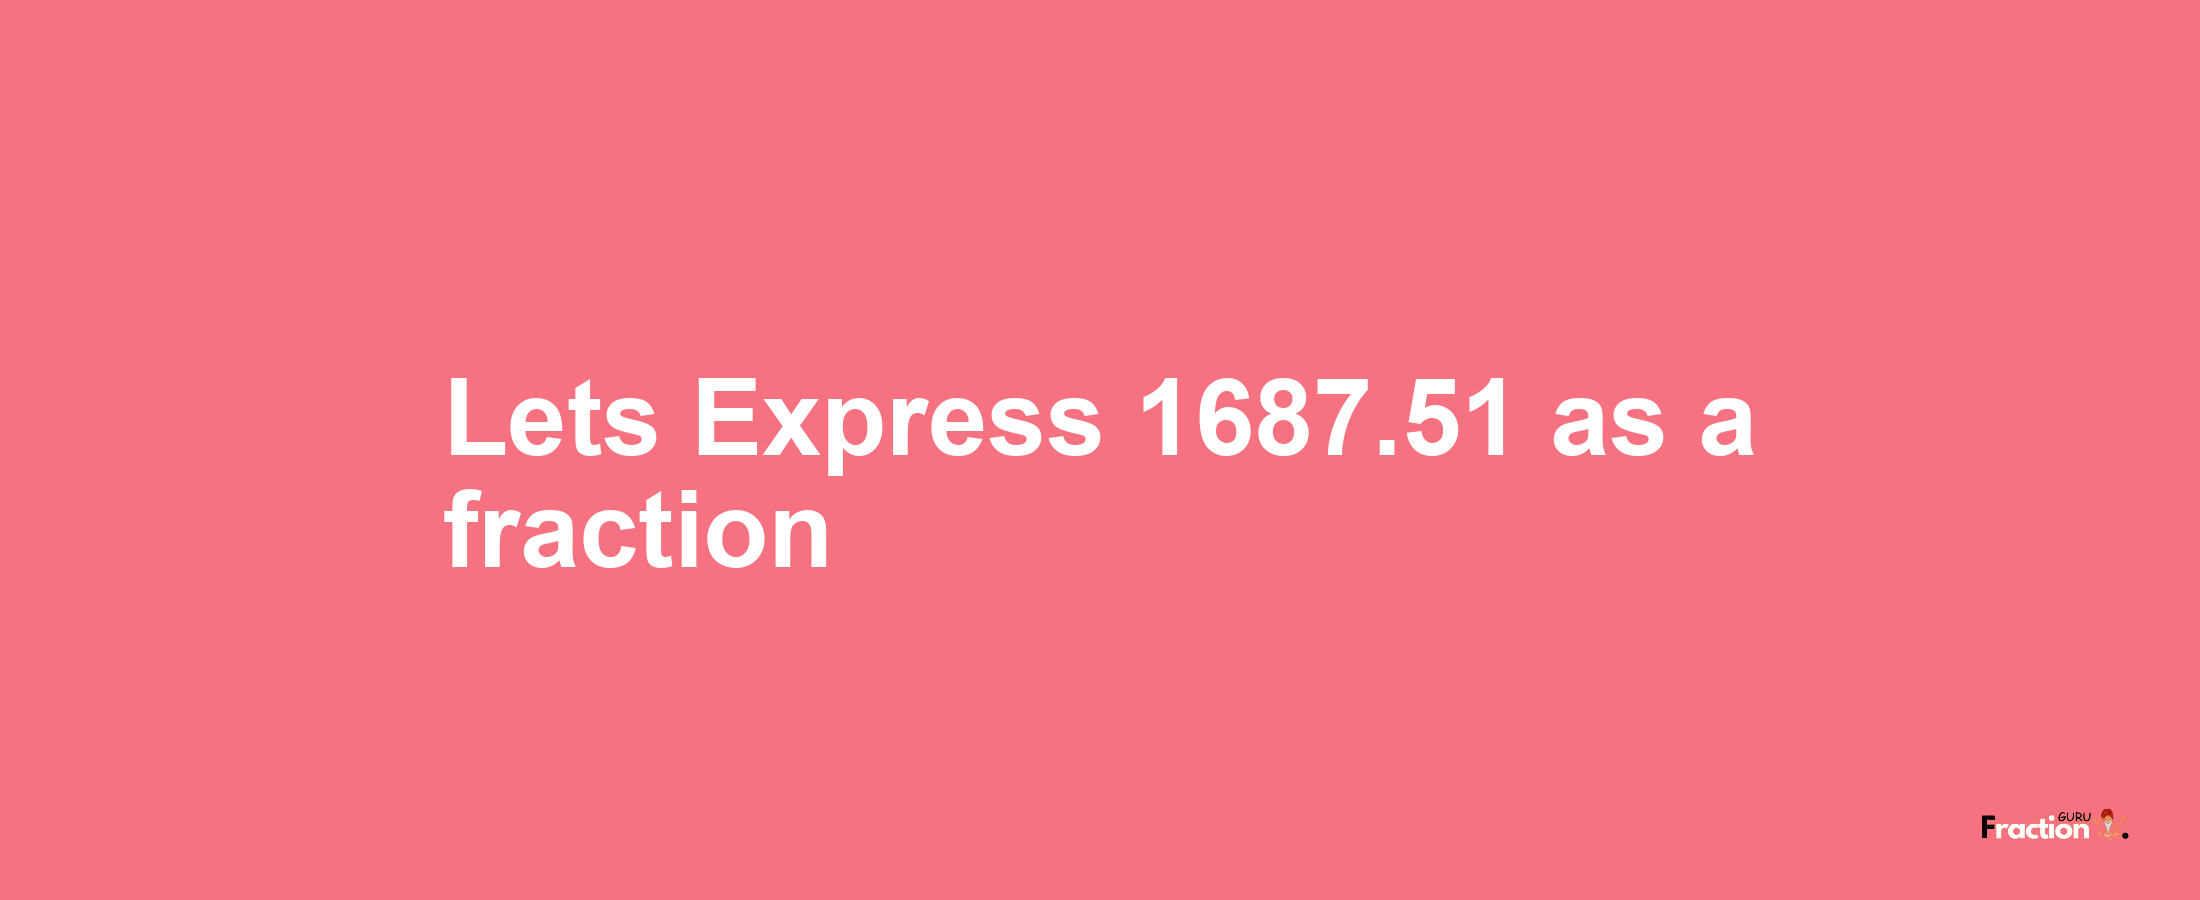 Lets Express 1687.51 as afraction